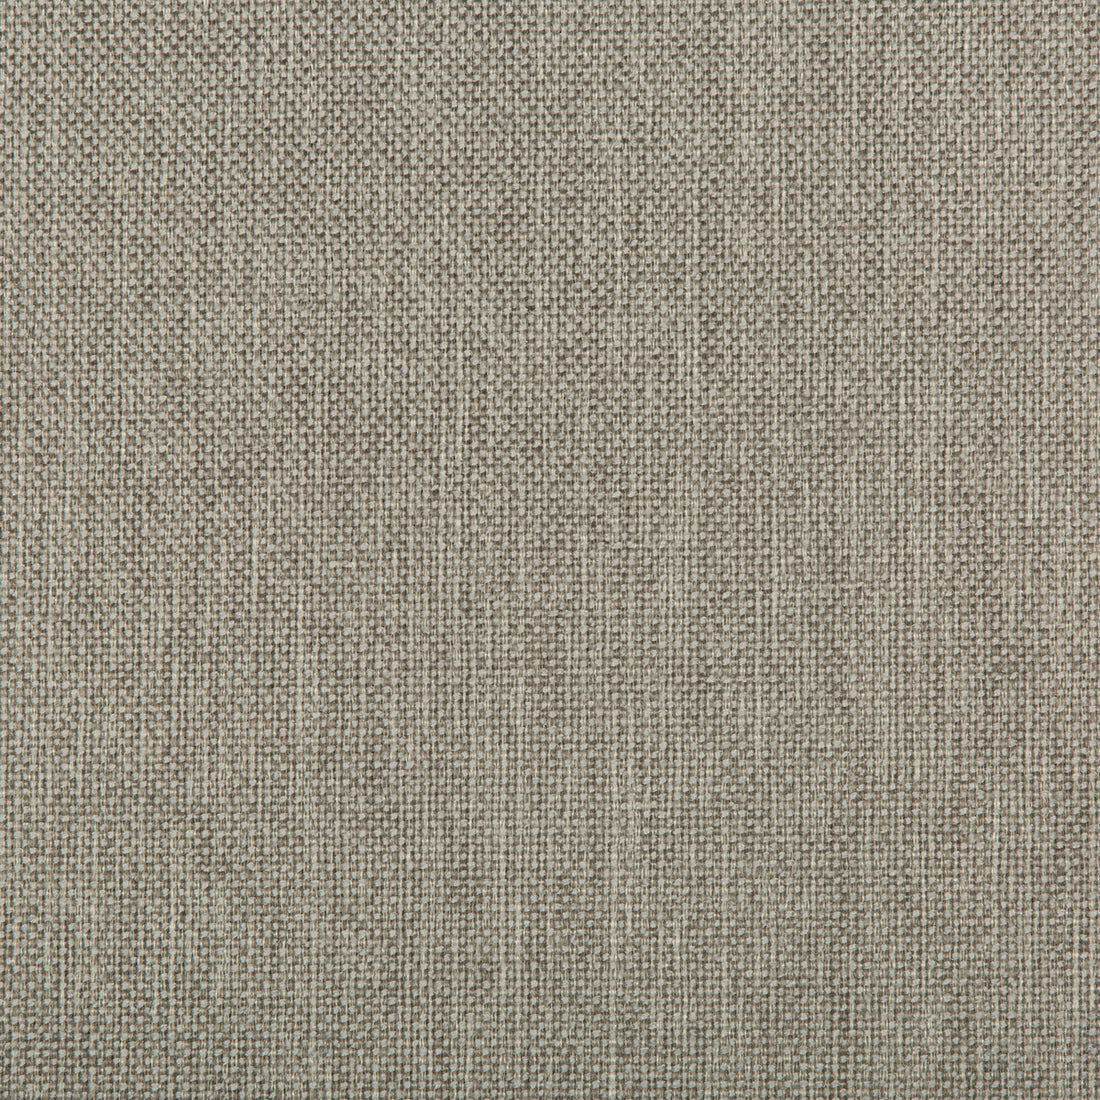 Williams fabric in stone color - pattern 35744.11.0 - by Kravet Contract in the Value Kravetarmor collection